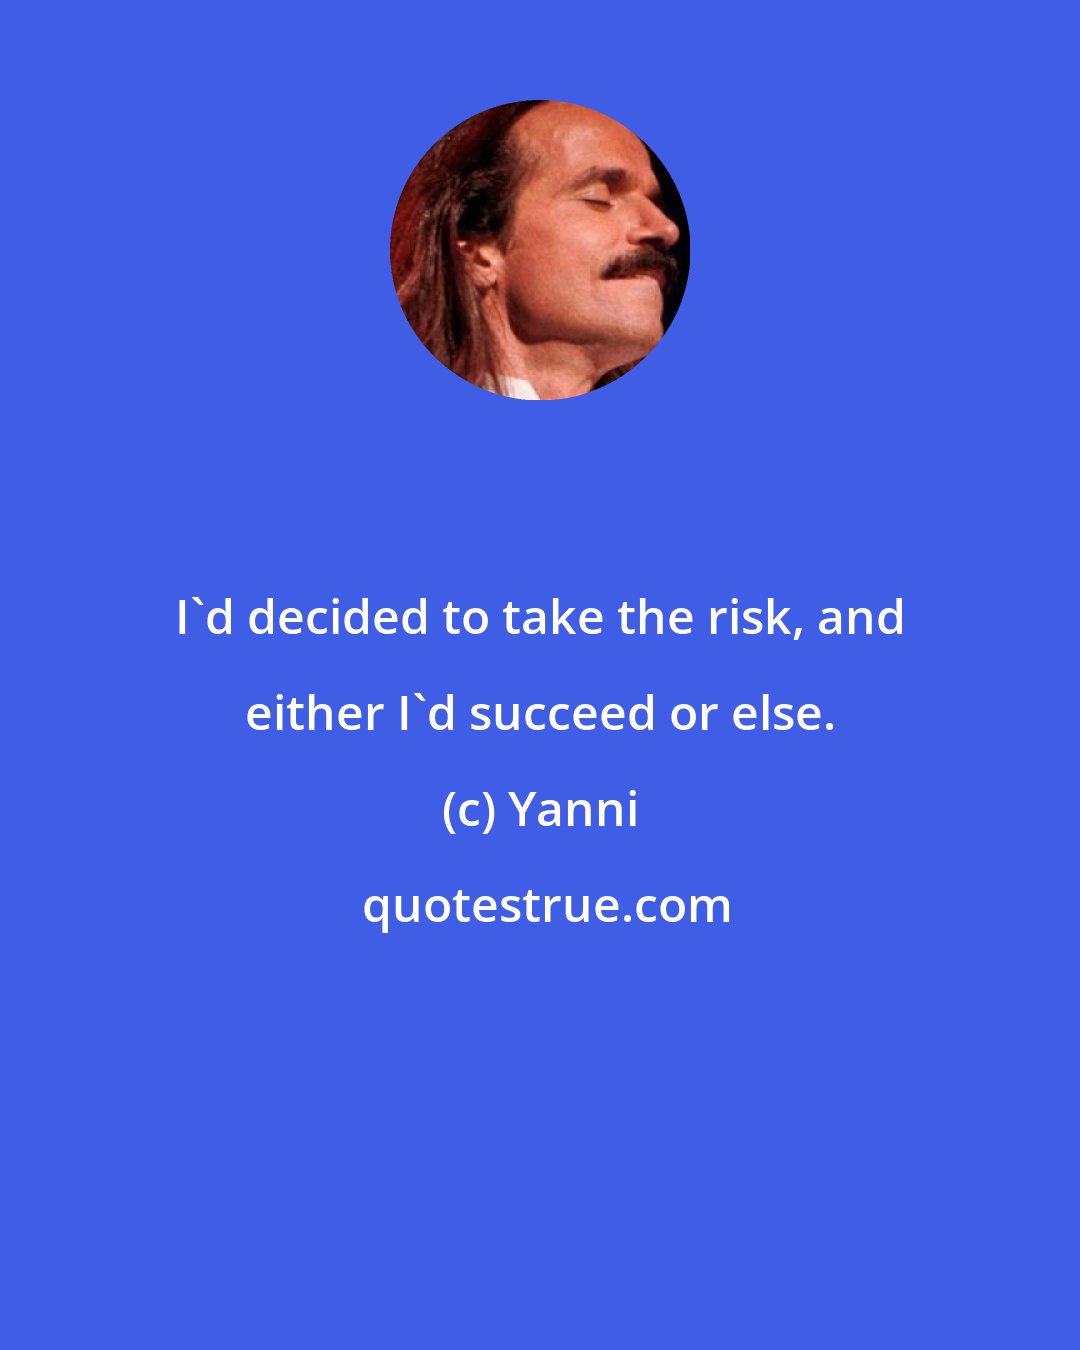 Yanni: I'd decided to take the risk, and either I'd succeed or else.